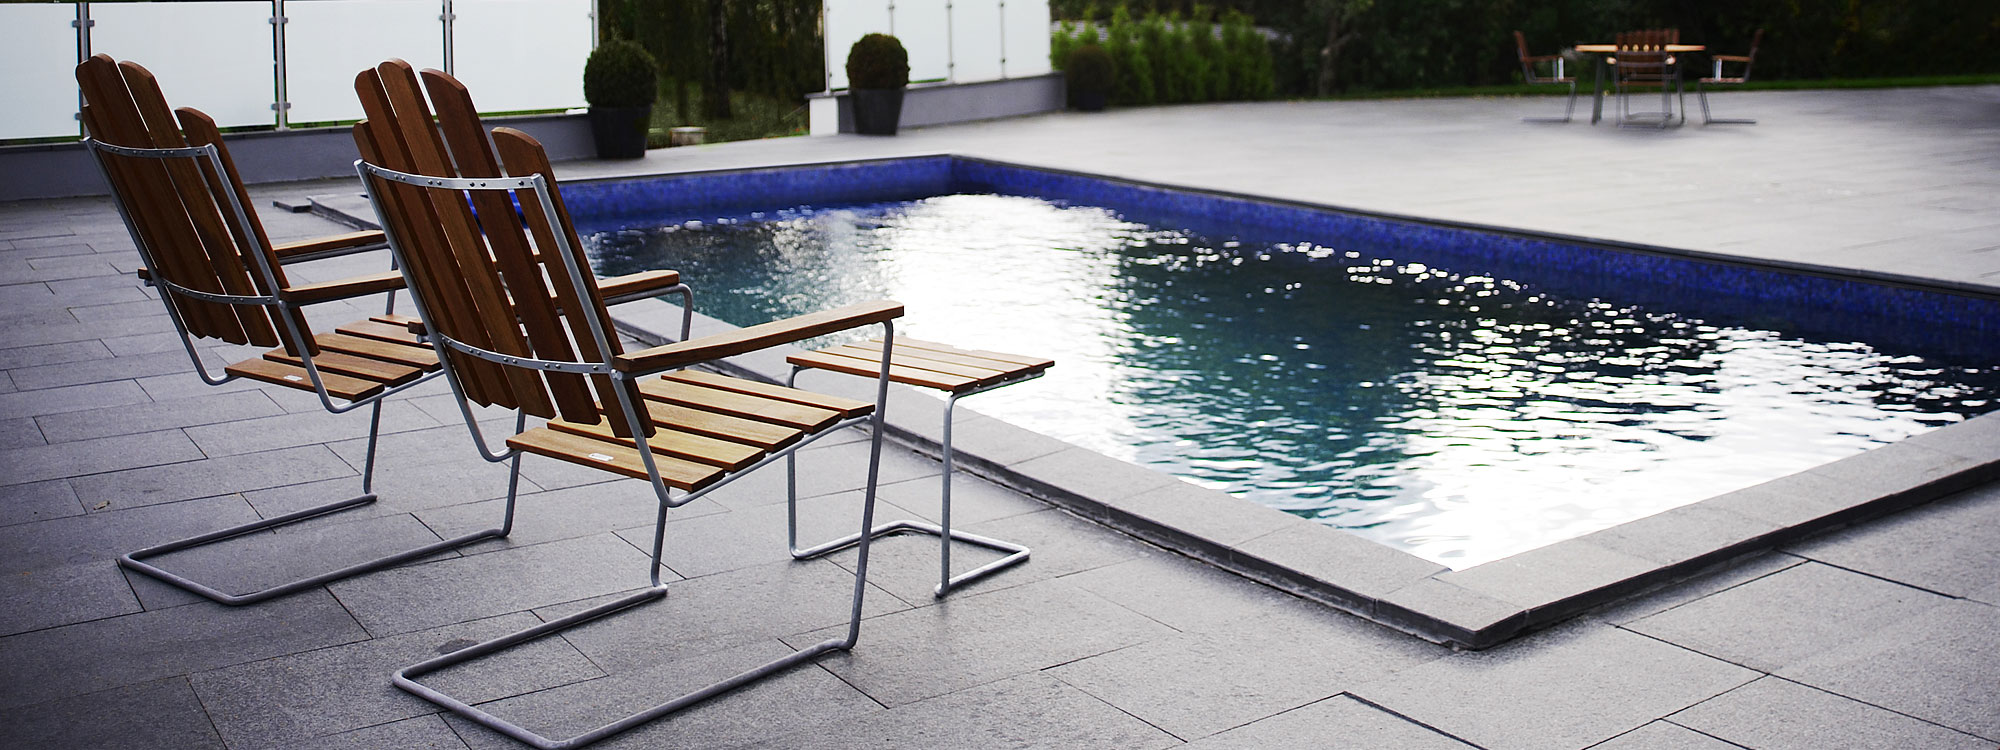 Image of pair of Grythyttan A3 cantilever garden lounge chairs and foots tools with galvanised steel frames and teak surfaces, shown on poolside at dusk